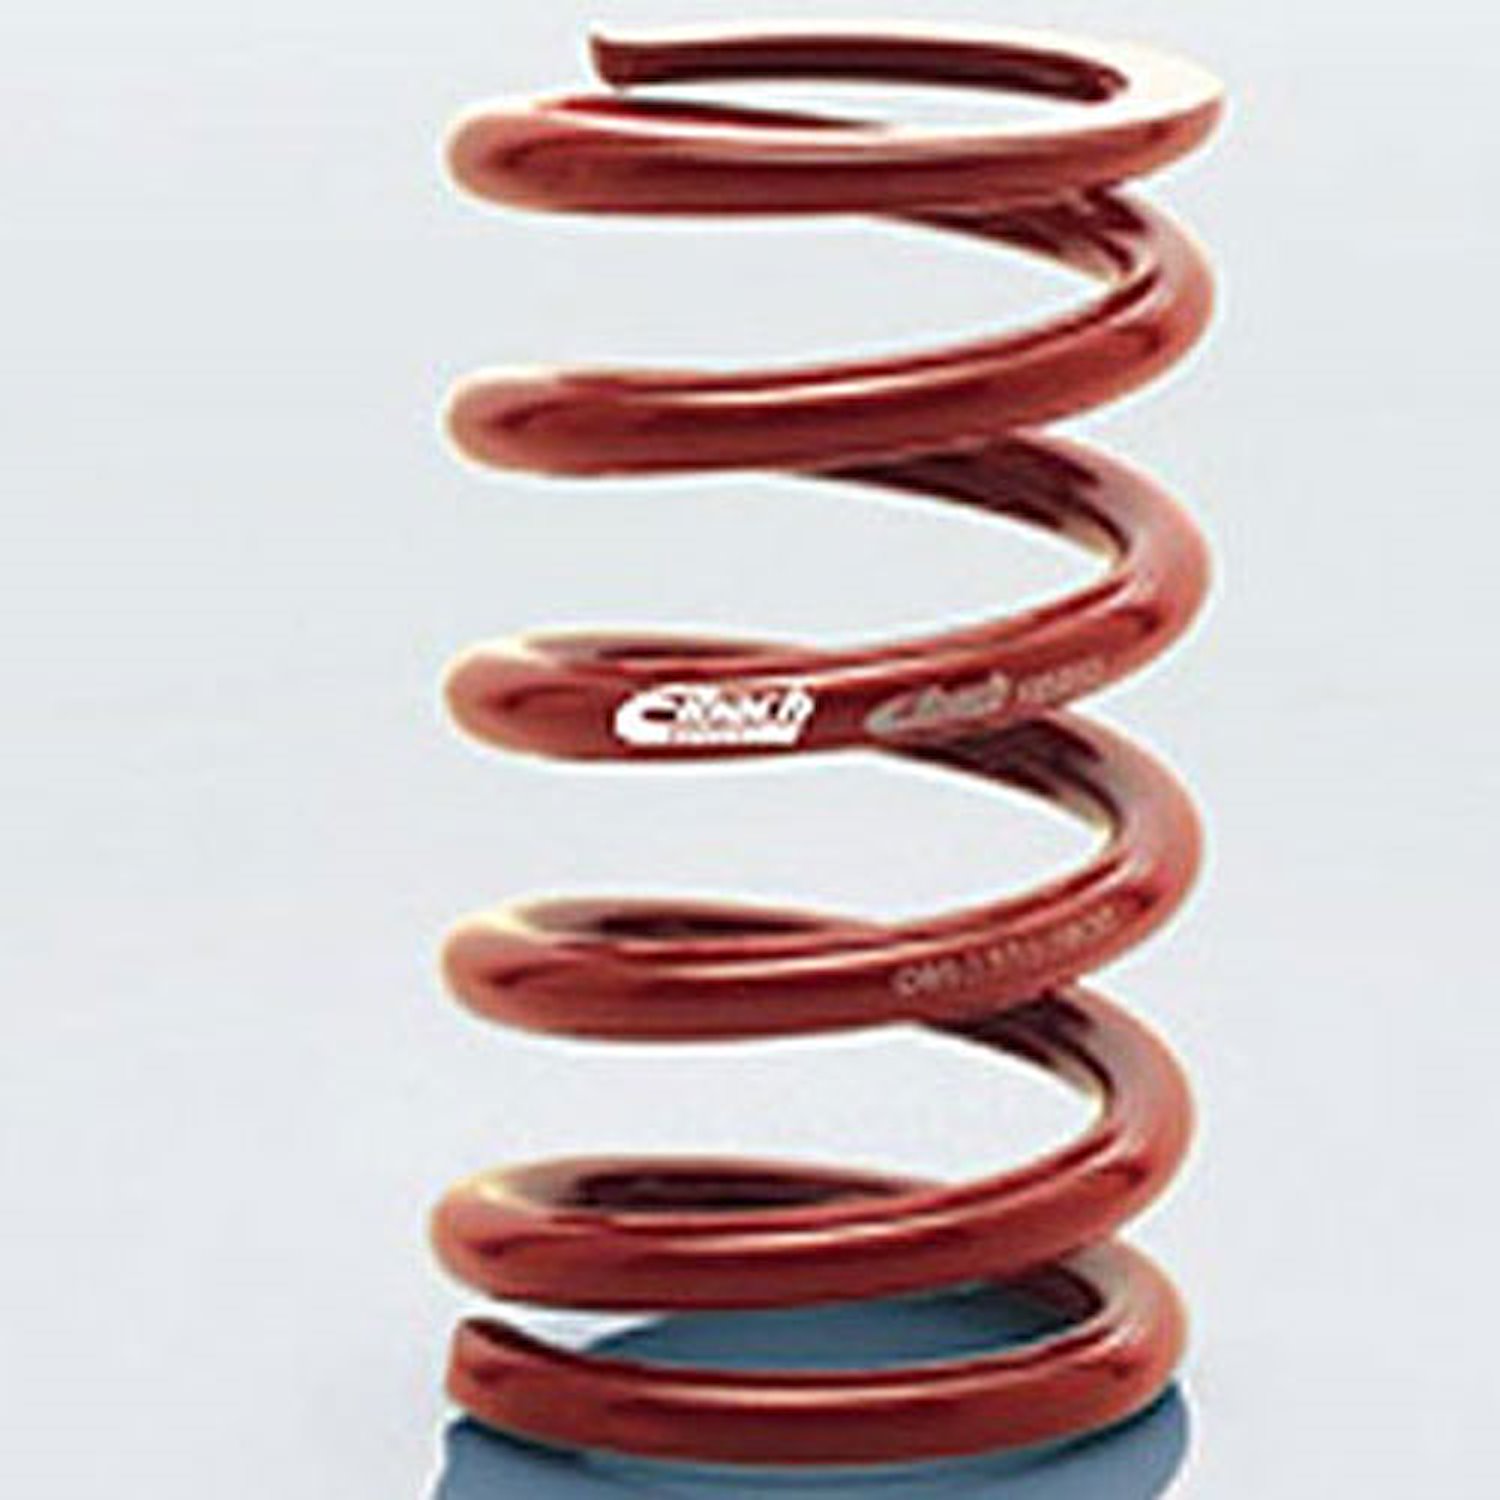 0950.550.1300 EIBACH CONVENTIONAL FRONT SPRING